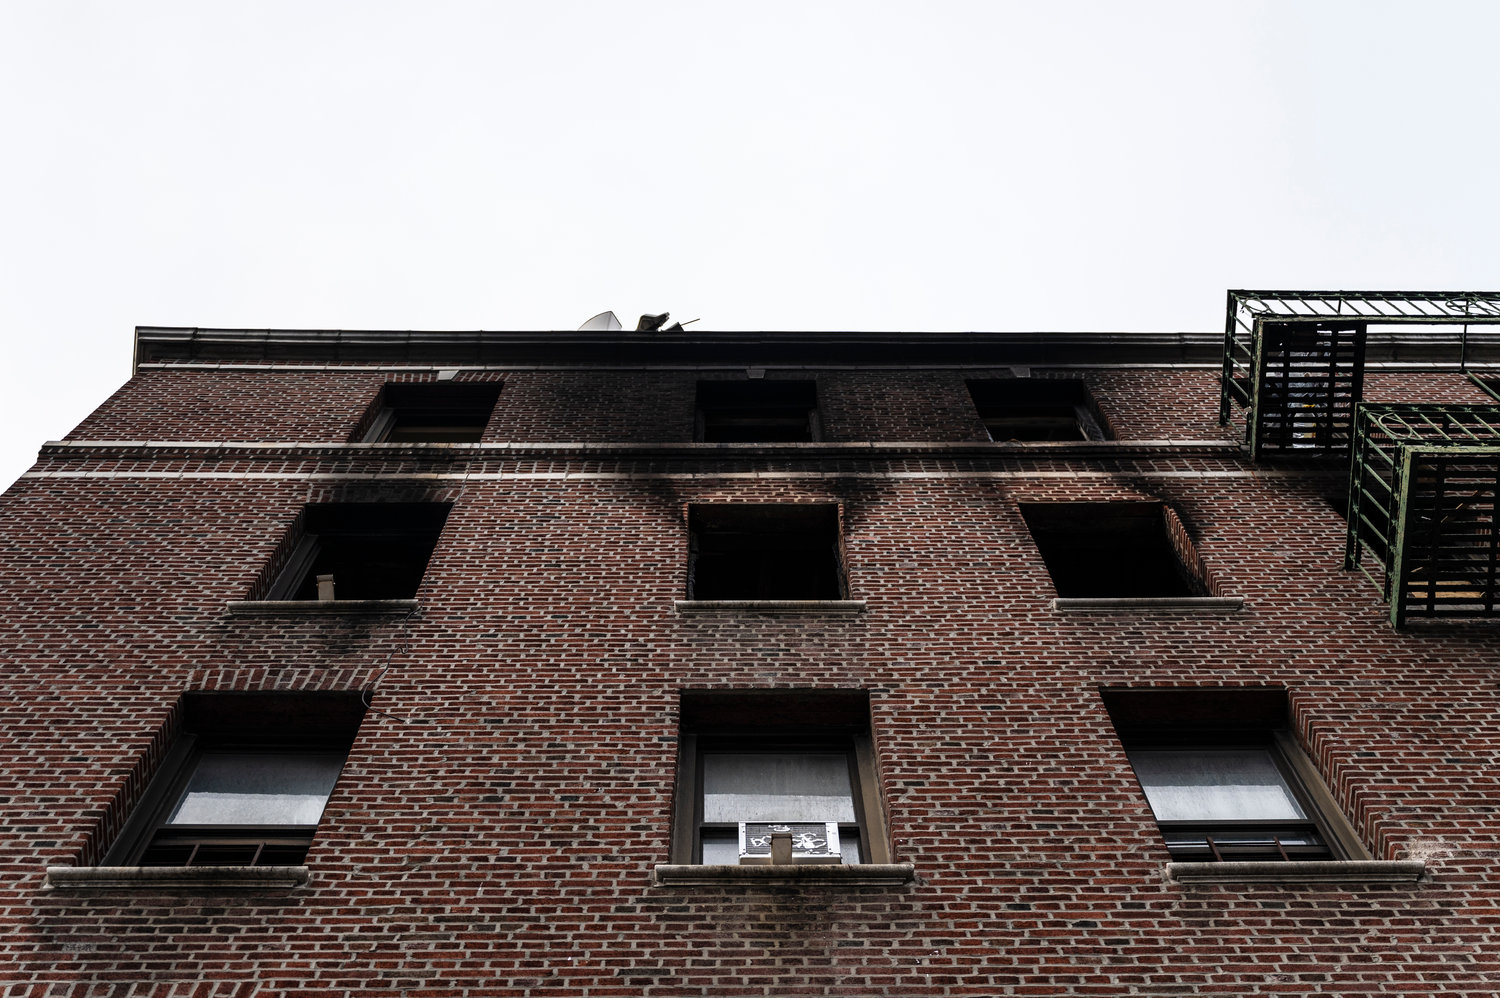 Soot on the exterior of the top two floors of 181 W. 238th St., tell us all we need to know about what happened last September when a blaze damaged or destroyed more than a dozen units, with many of those tenants still not sure on when they might be able to return.